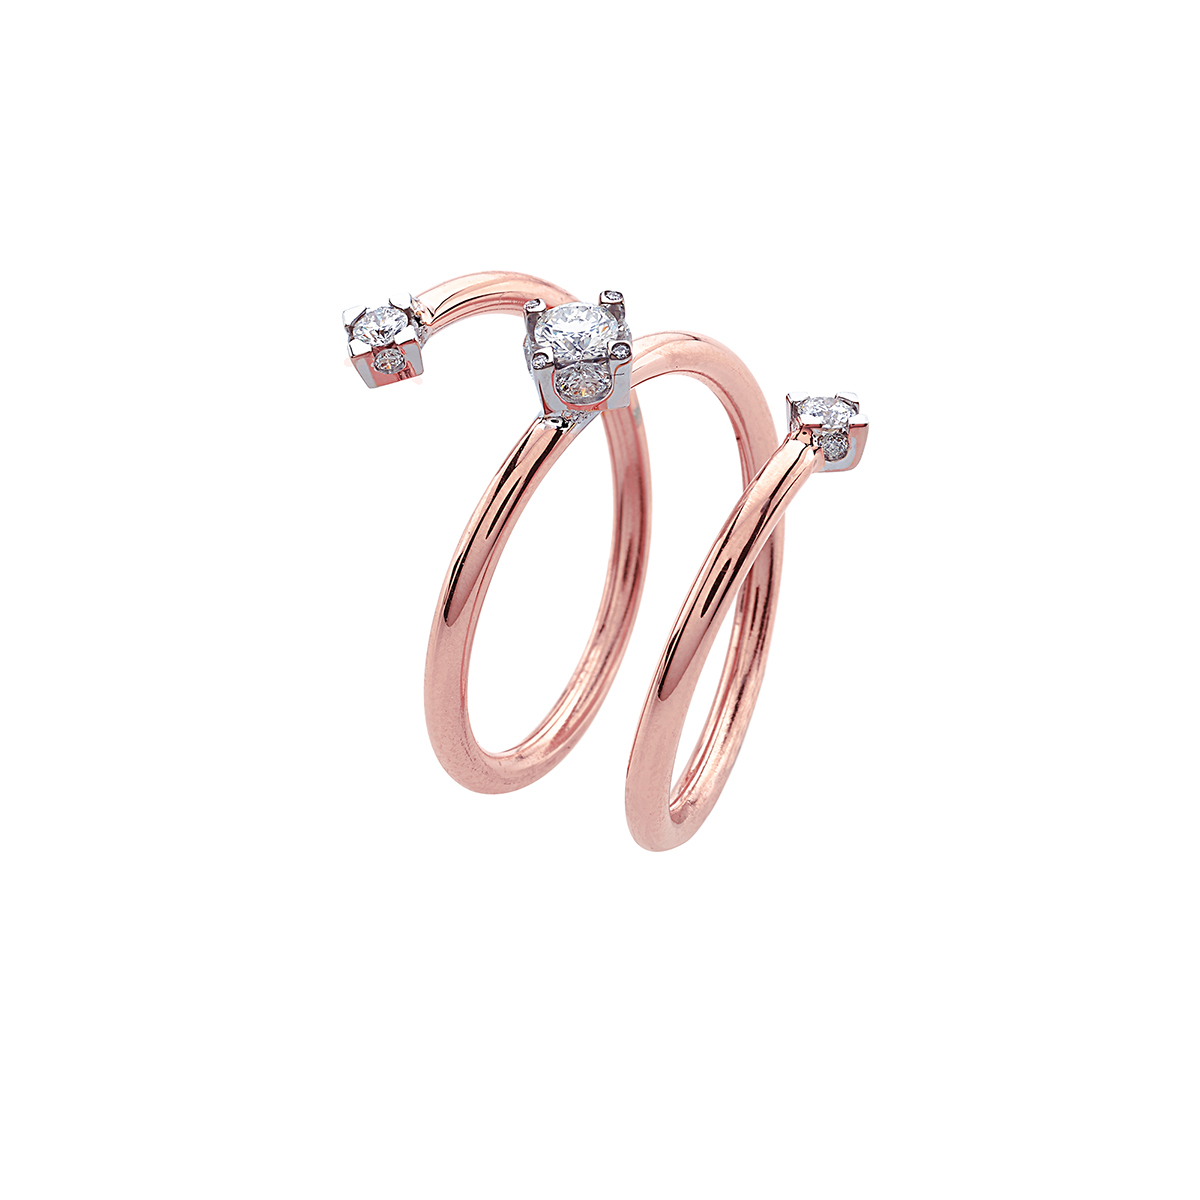 4D Double Spiral Ring in 18K Rose Gold